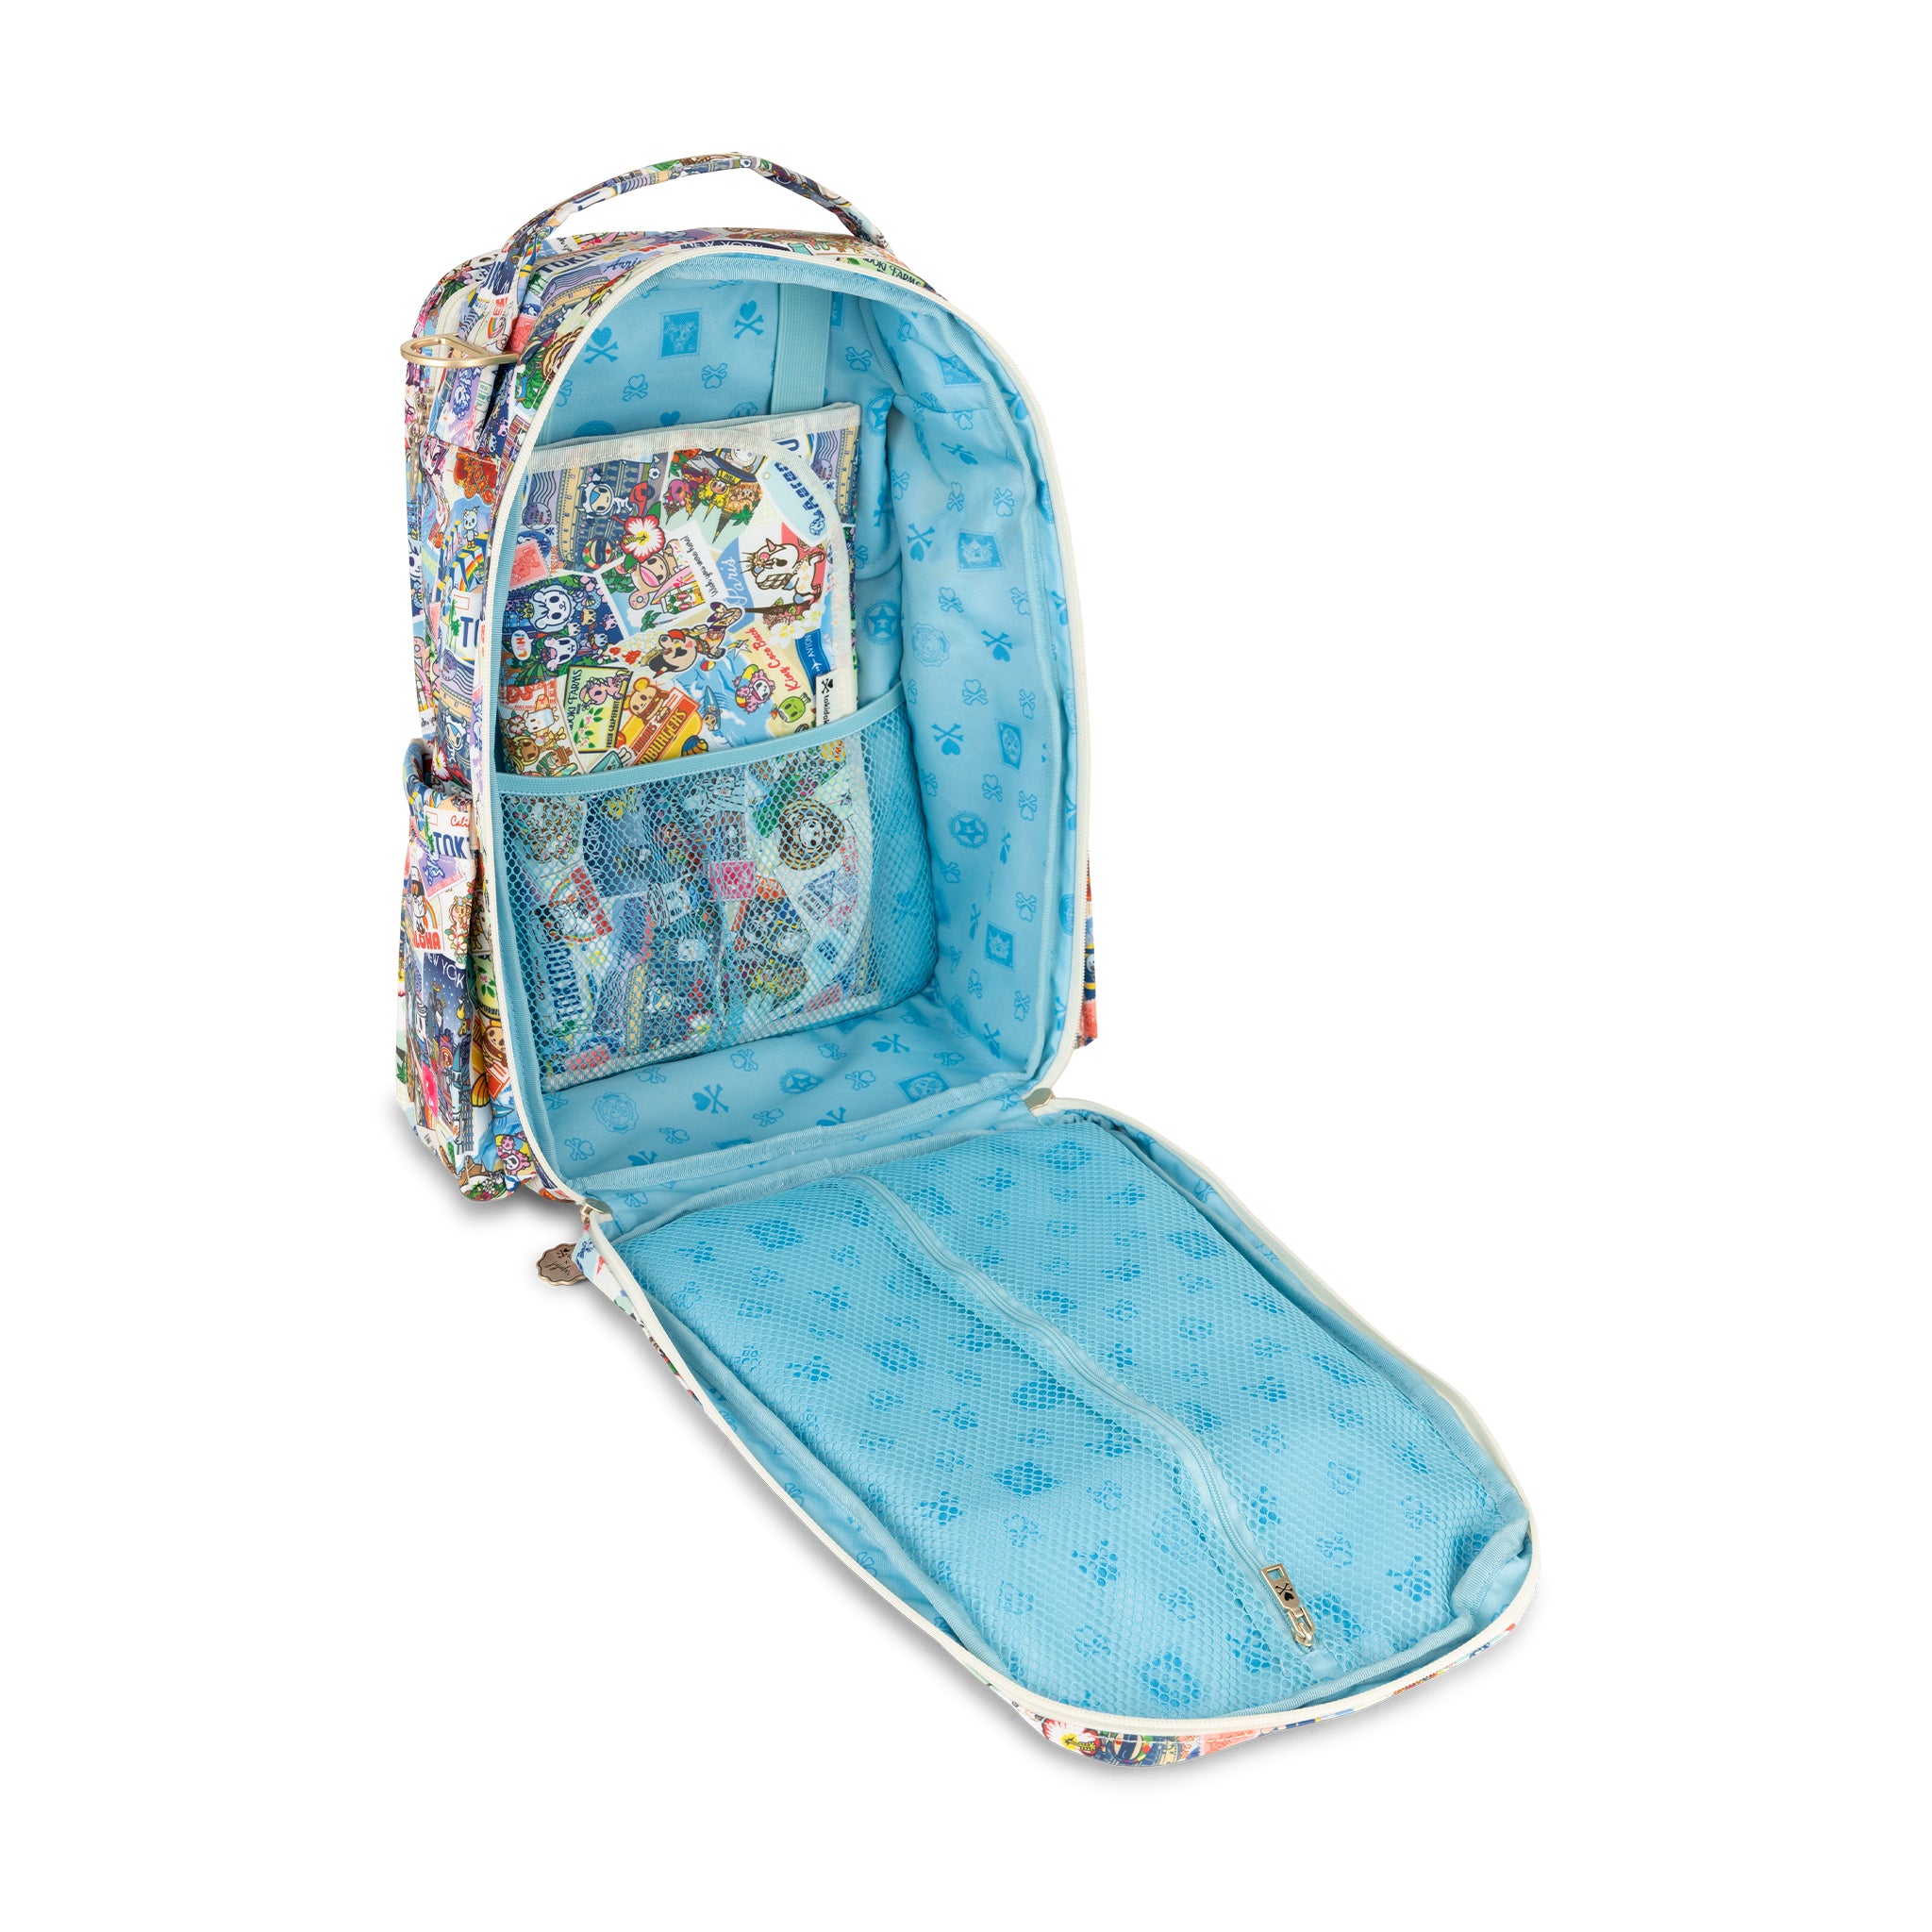 Multicolor Postcards with tokidoki characters traveling Be Right Back Diaper Backpack Interior View with Changing Pad